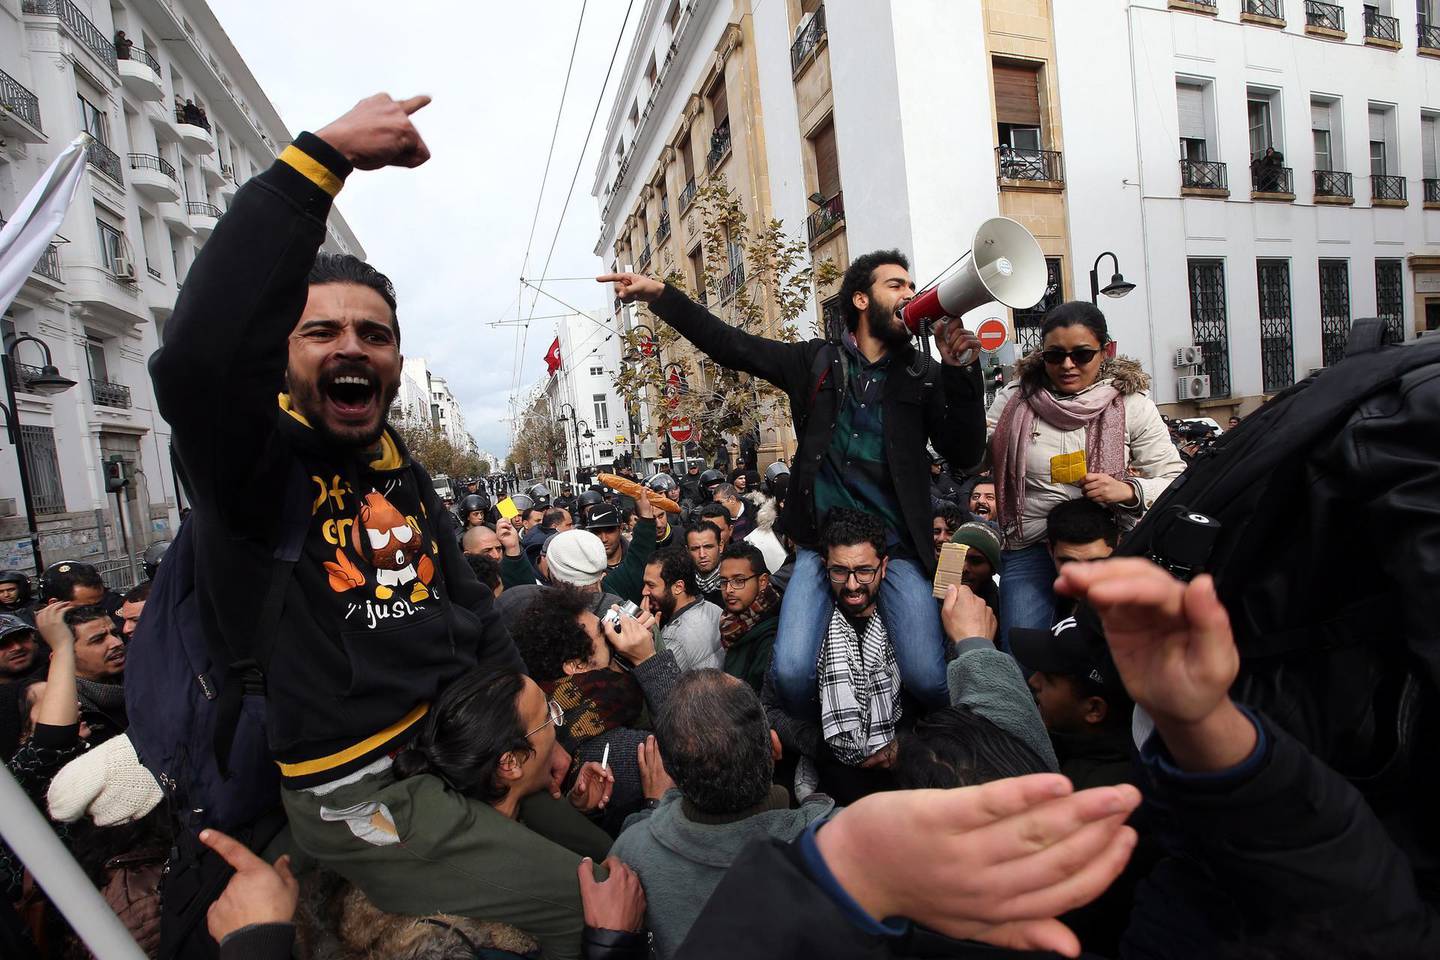 epa06433388 Tunisian protesters shout slogans during a demonstration after the government announced tax hikes and austerity measures and against increased prices of some goods in Tunis, Tunisia, 12 January 2018. Protests were held across Tunisia since 08 January after a the new year's price and tax increase came into effect on 01 January 2018.  EPA/MOHAMED MESSARA